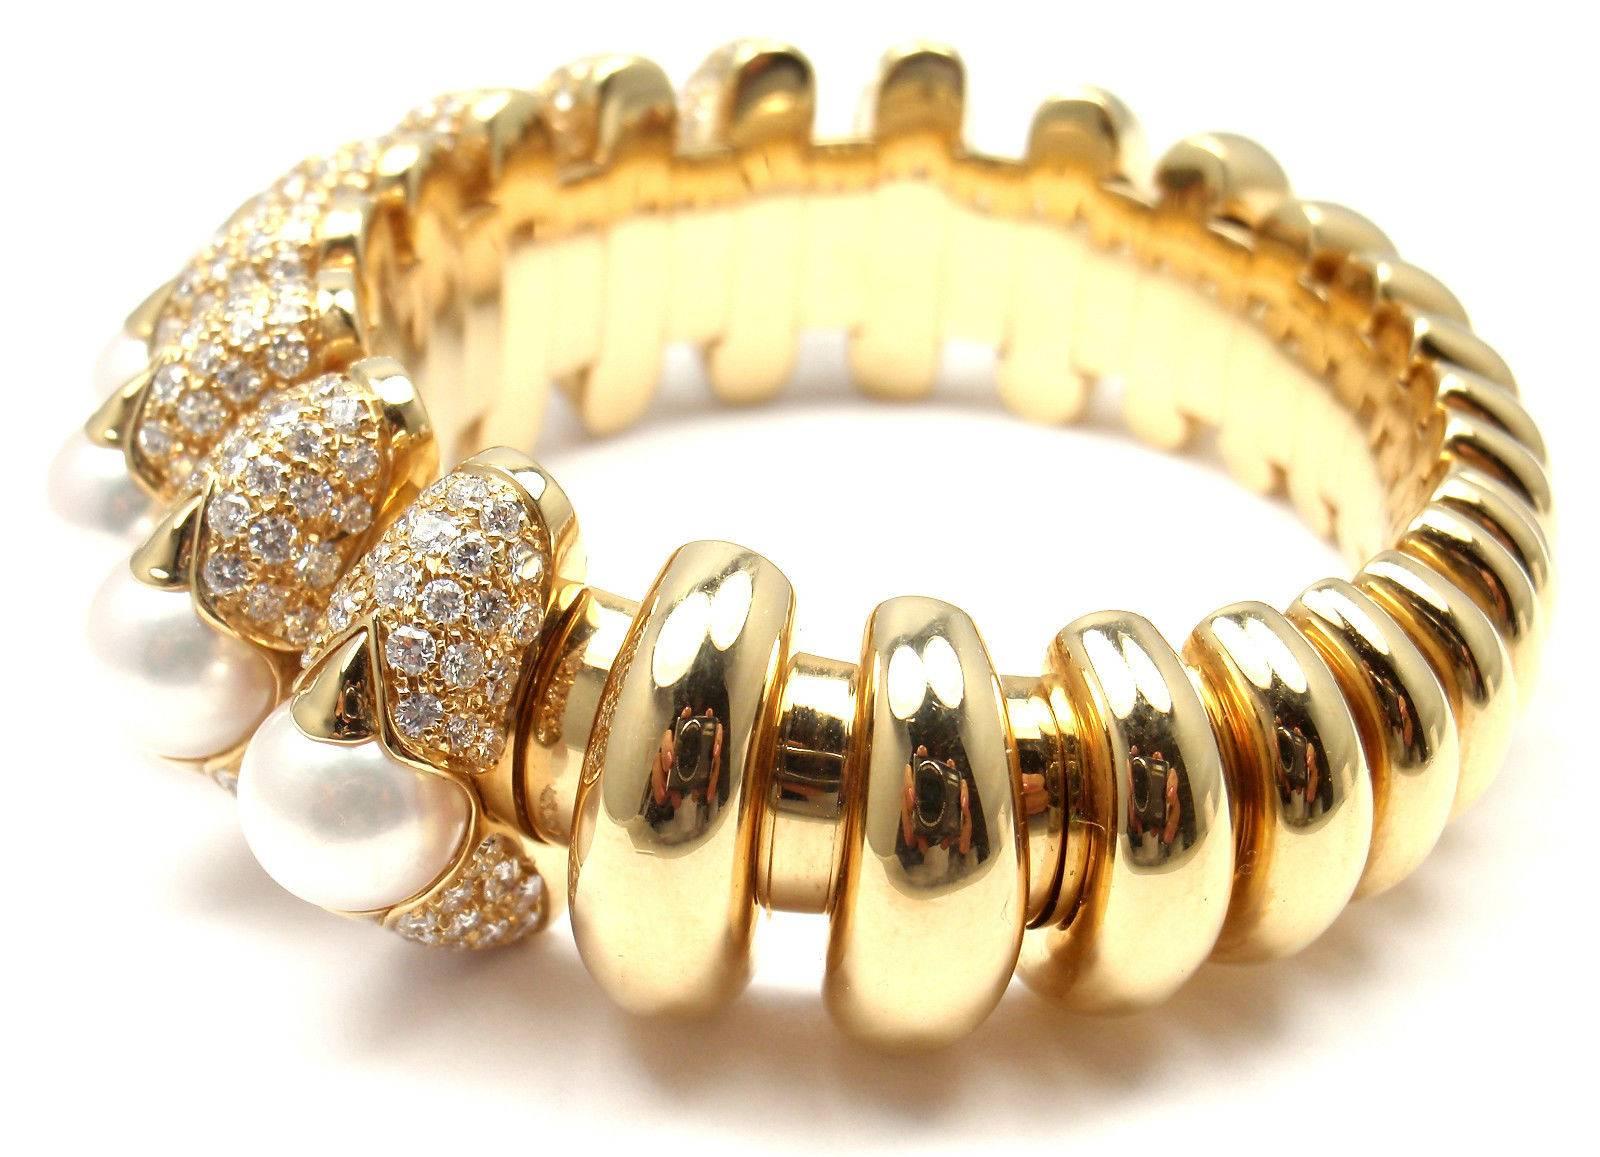 18k Yellow Gold Diamond Pearl Celtaura Bangle Bracelet by Bulgari. 
With 486 round brilliant cut diamonds VVS1 clarity, E color total weight approx. 10ct. 9 cultured pearls 8mm each.
This bracelet comes with original Bulgari box.

Details: